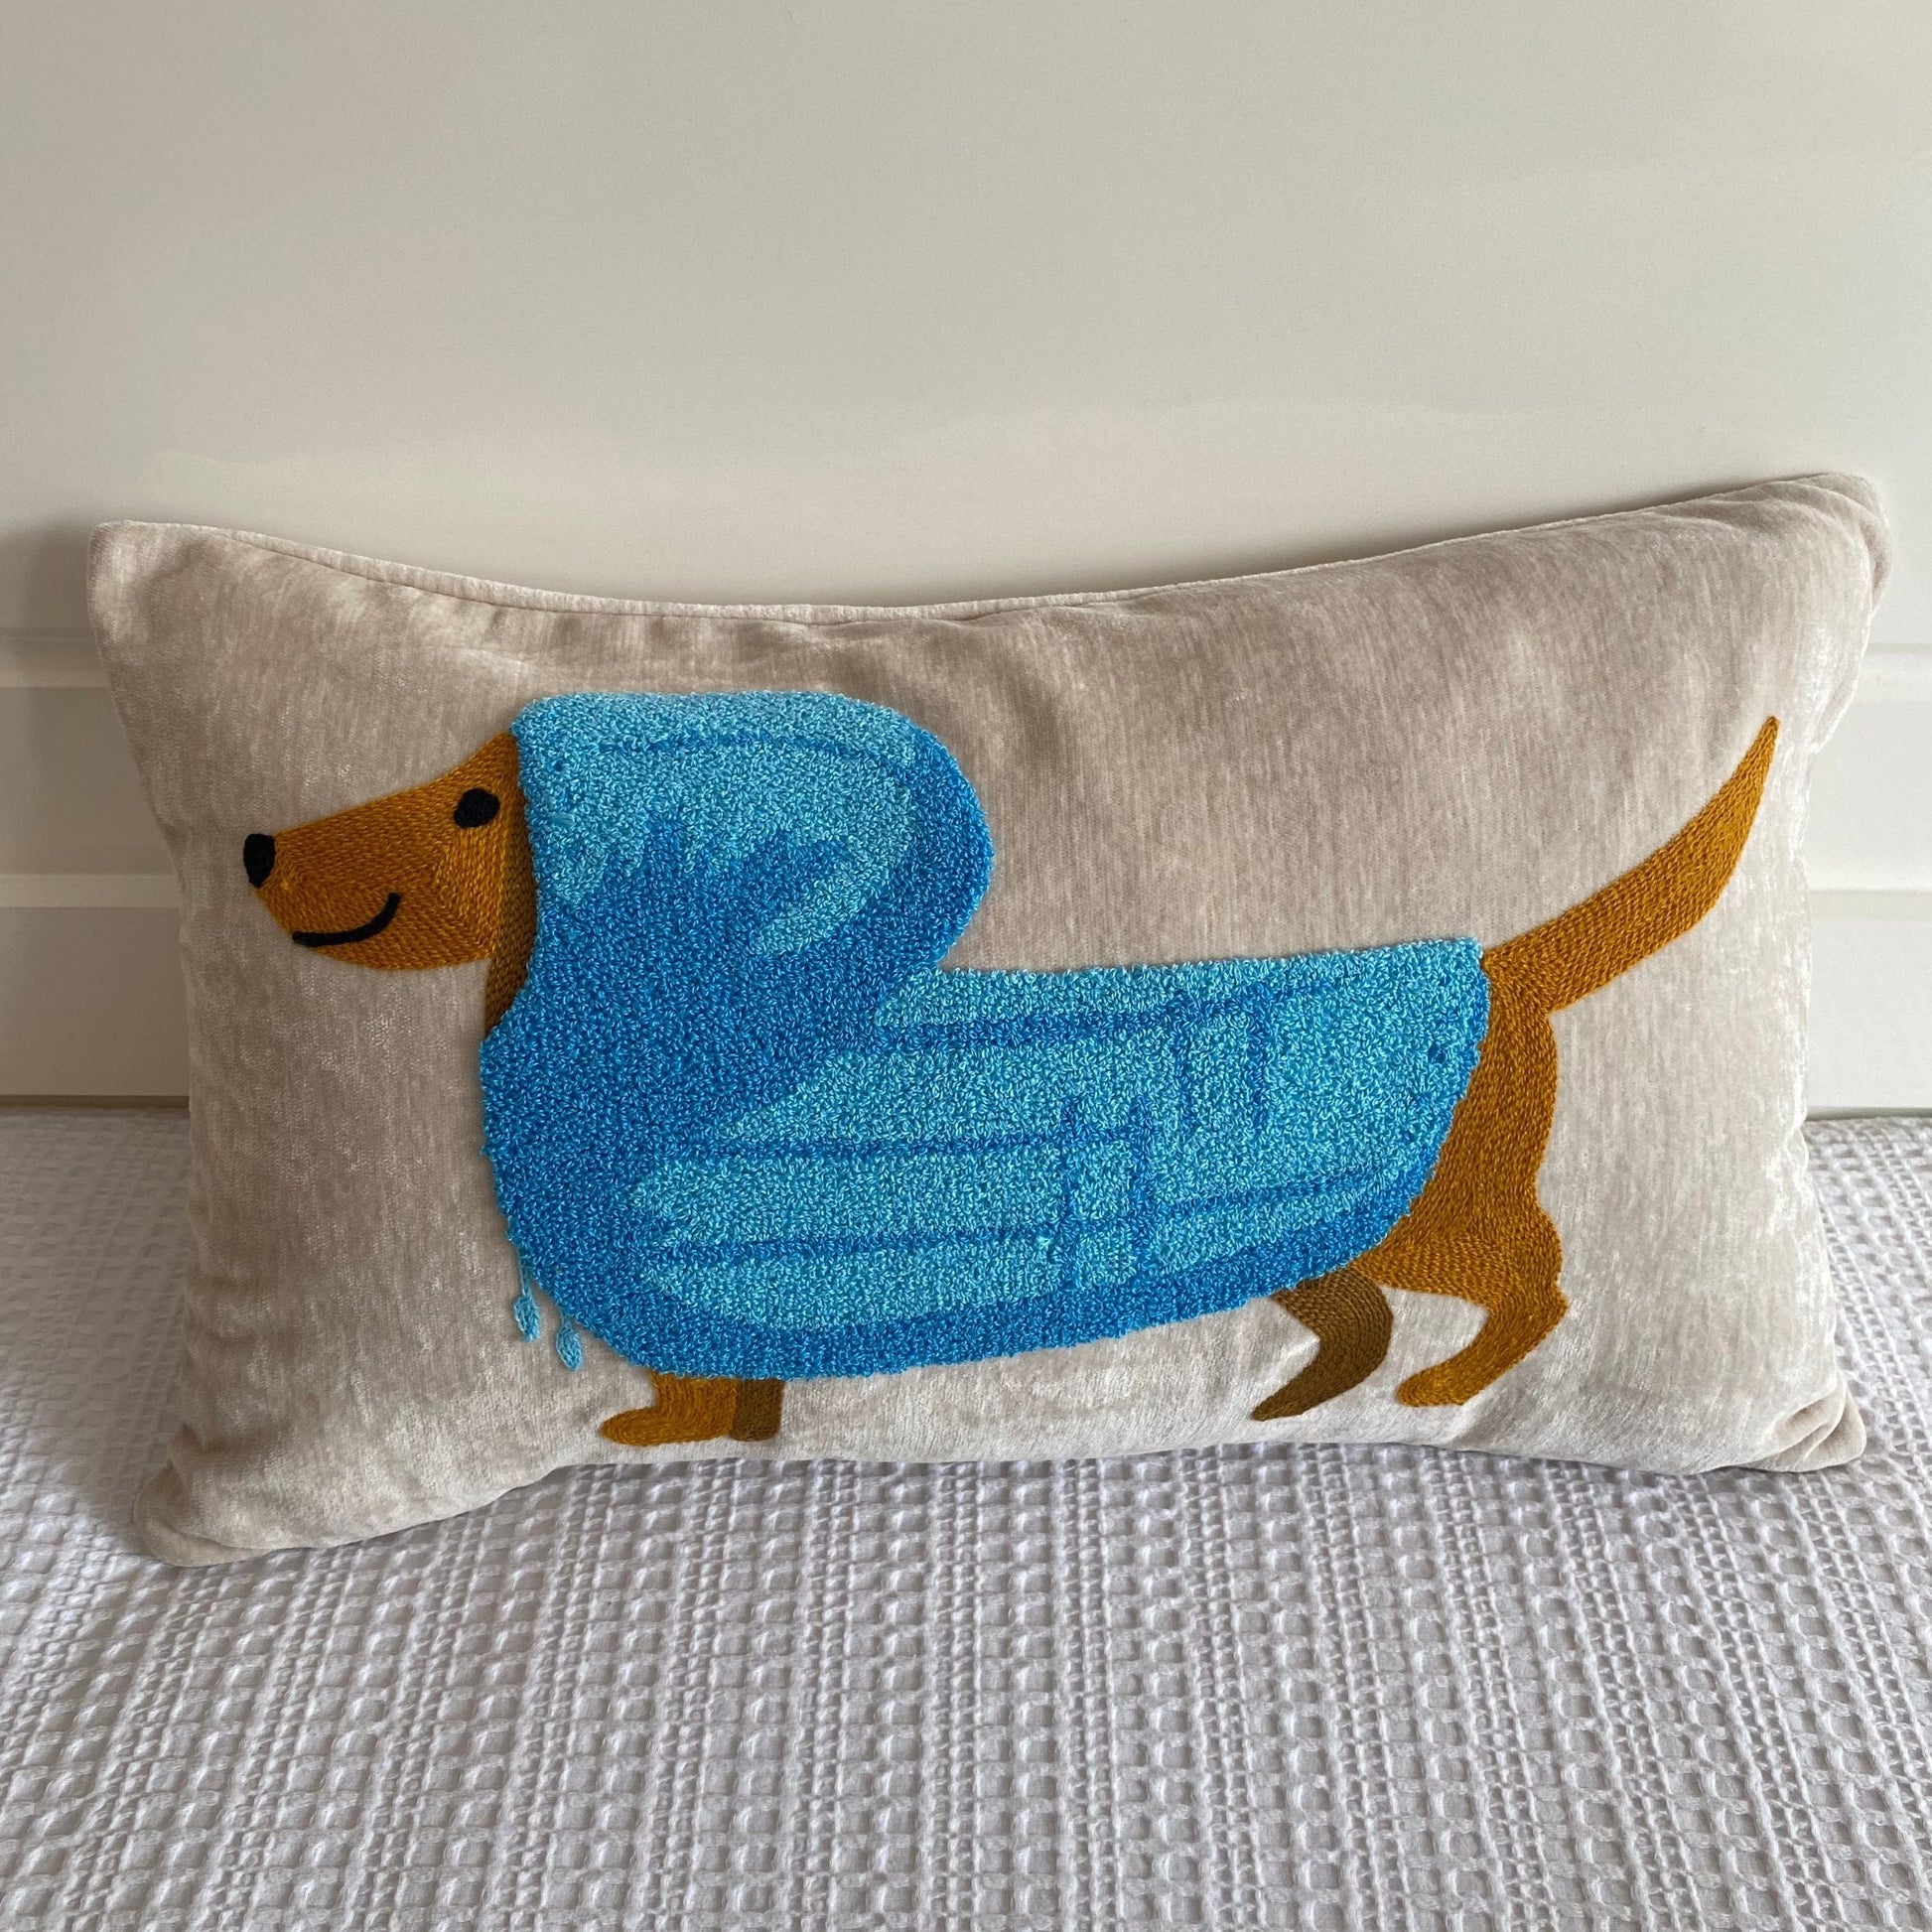 Embroidered Dachshund Pillow Blue raincoat / Cushion cover The Doxie World